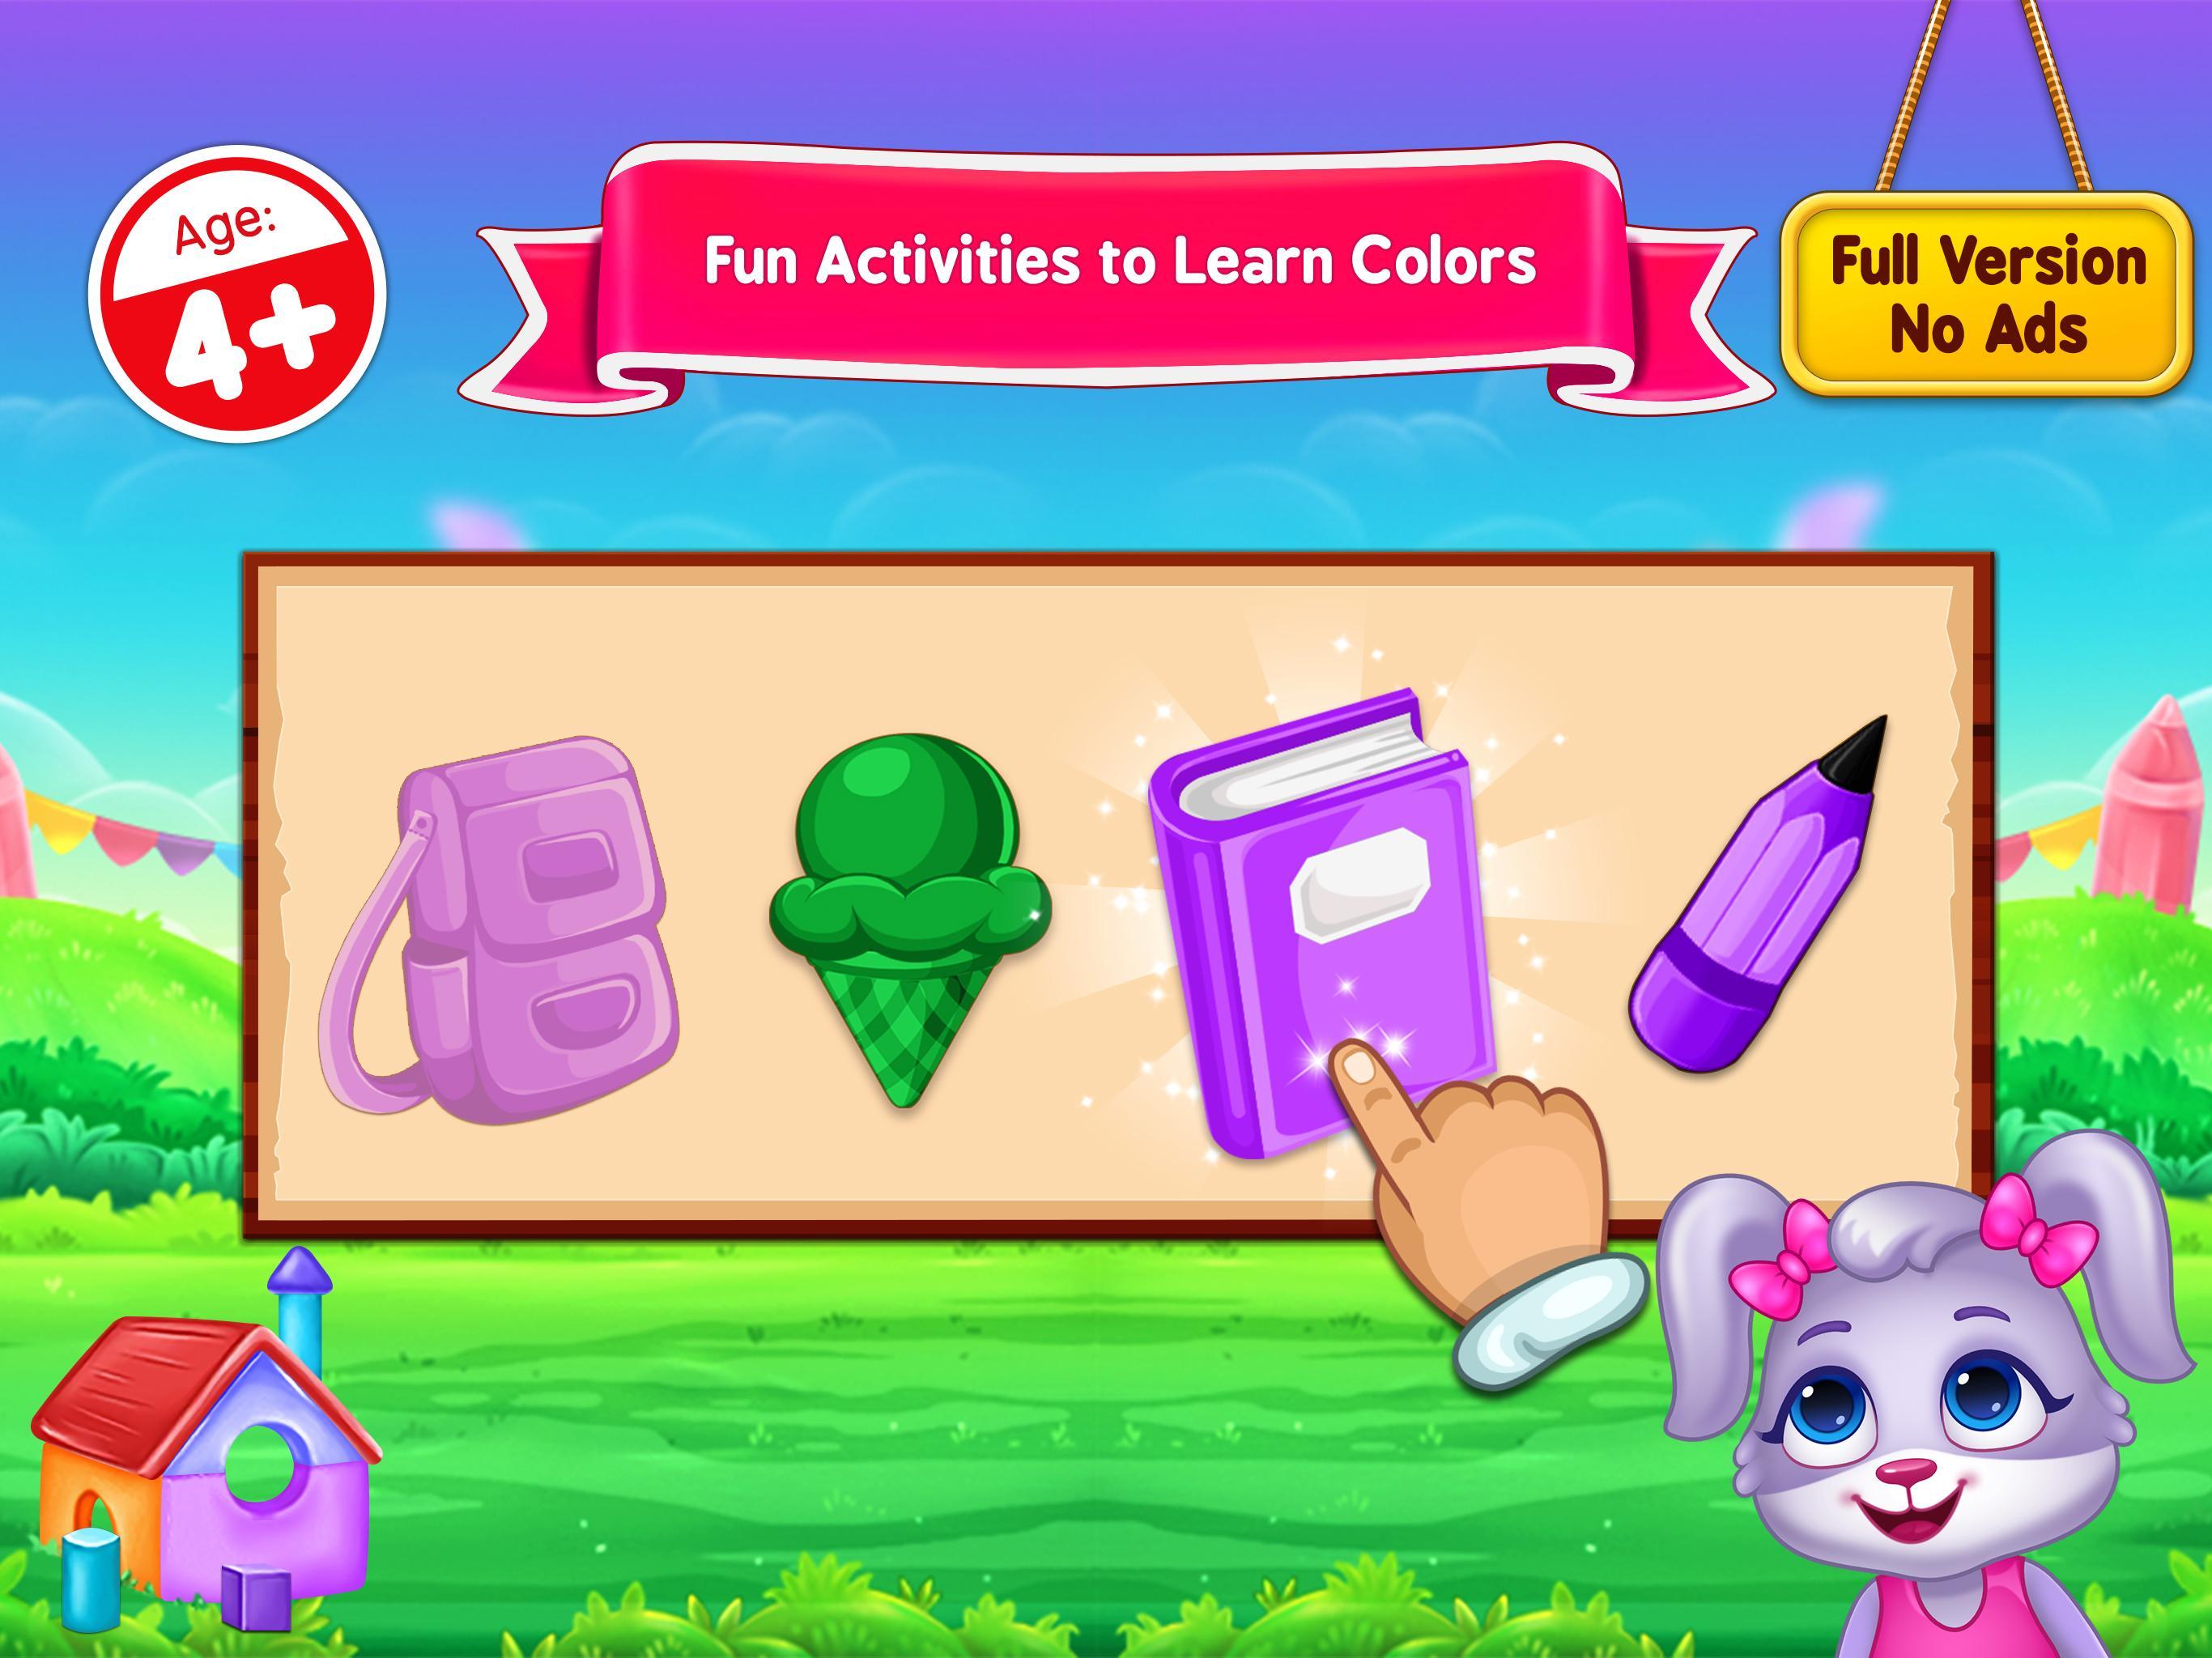 Colors & Shapes - Kids Learn Color and Shape 1.2.5 Screenshot 9